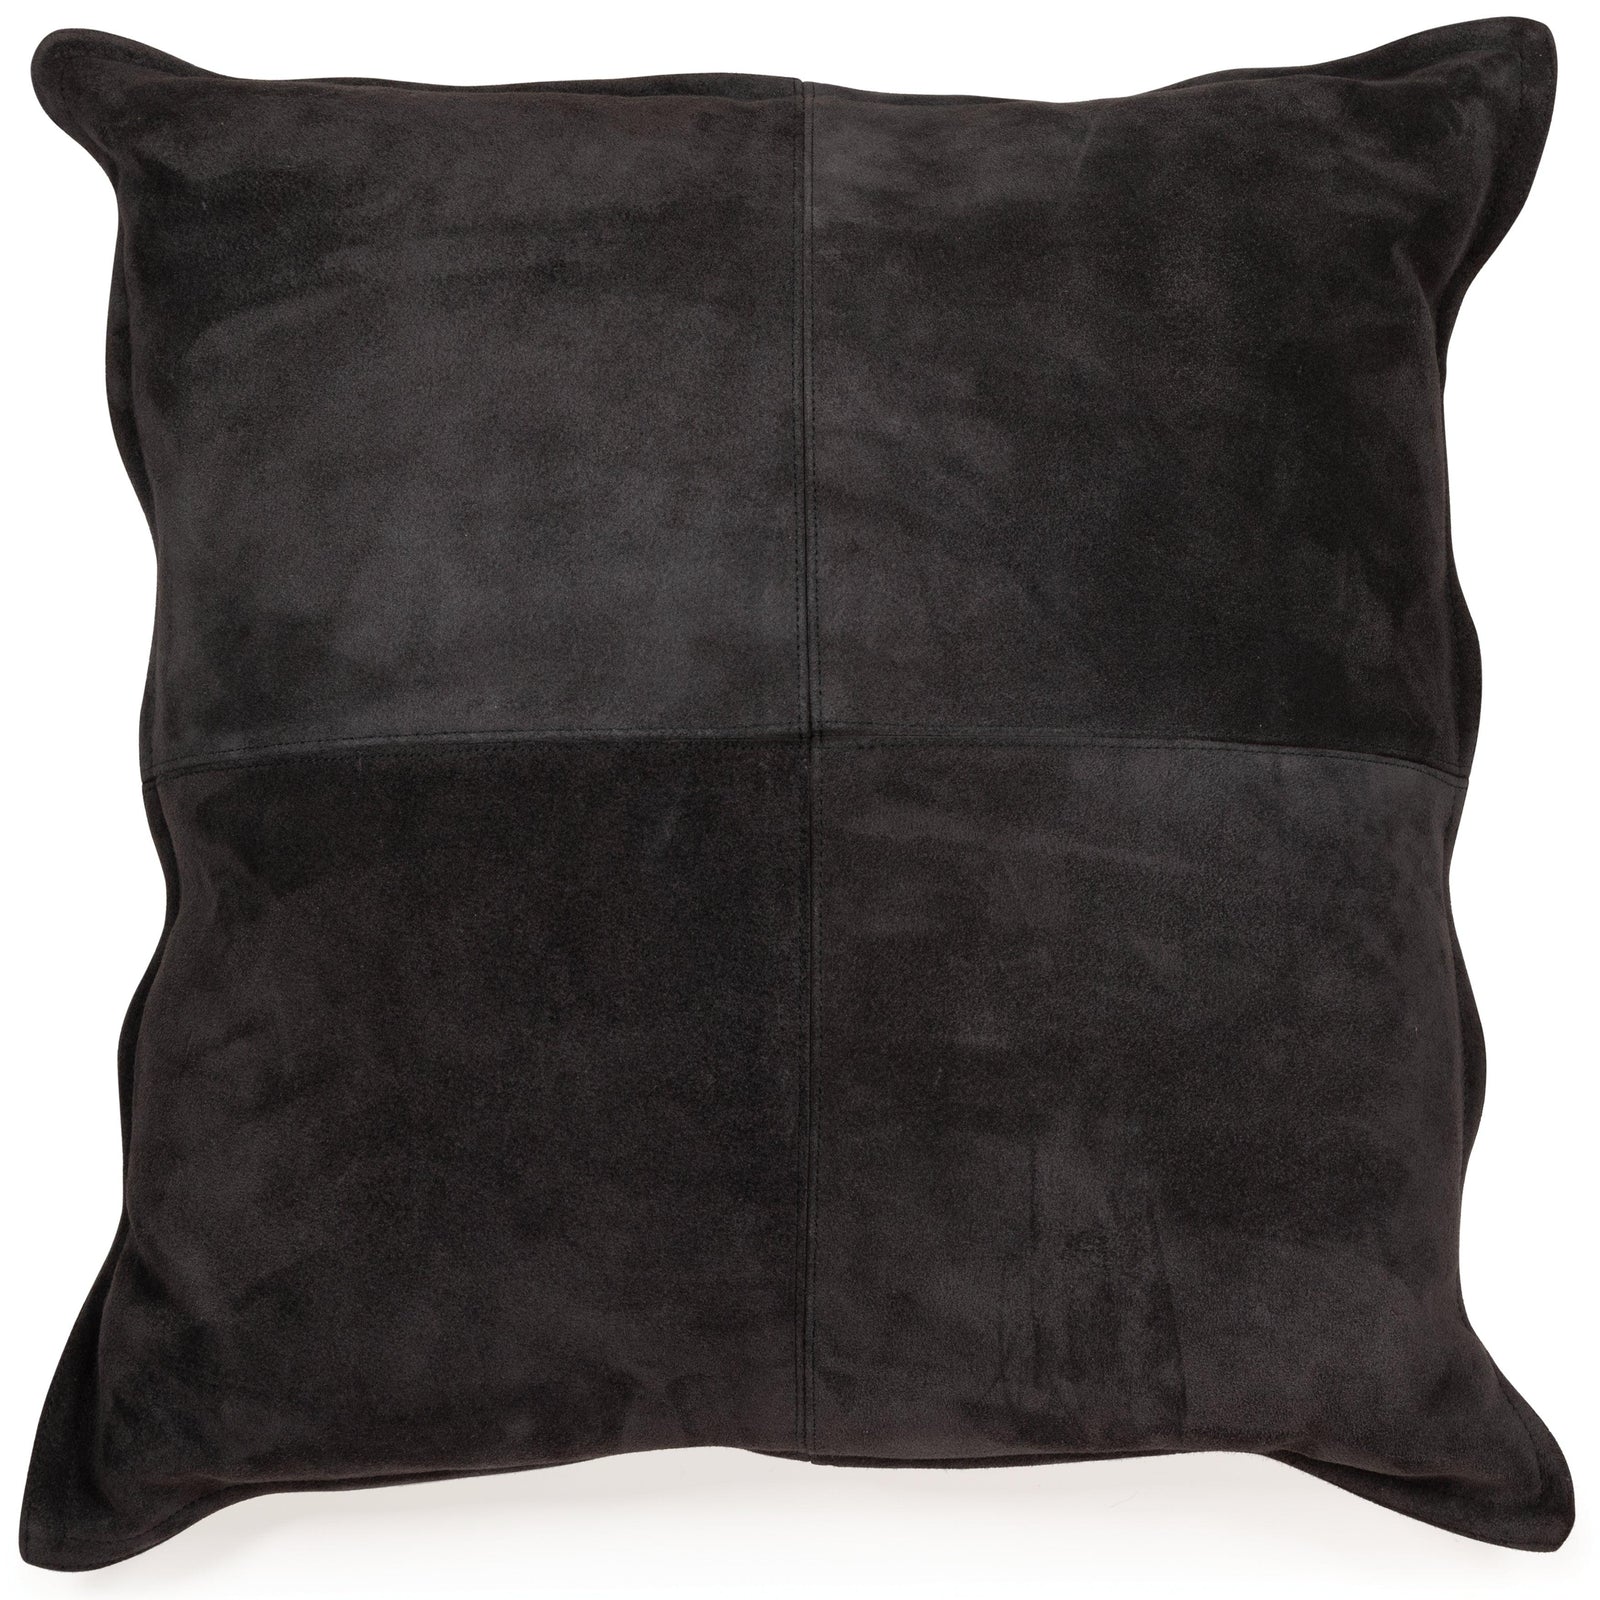 Rayvale Charcoal Pillow (Set Of 4) - Ella Furniture